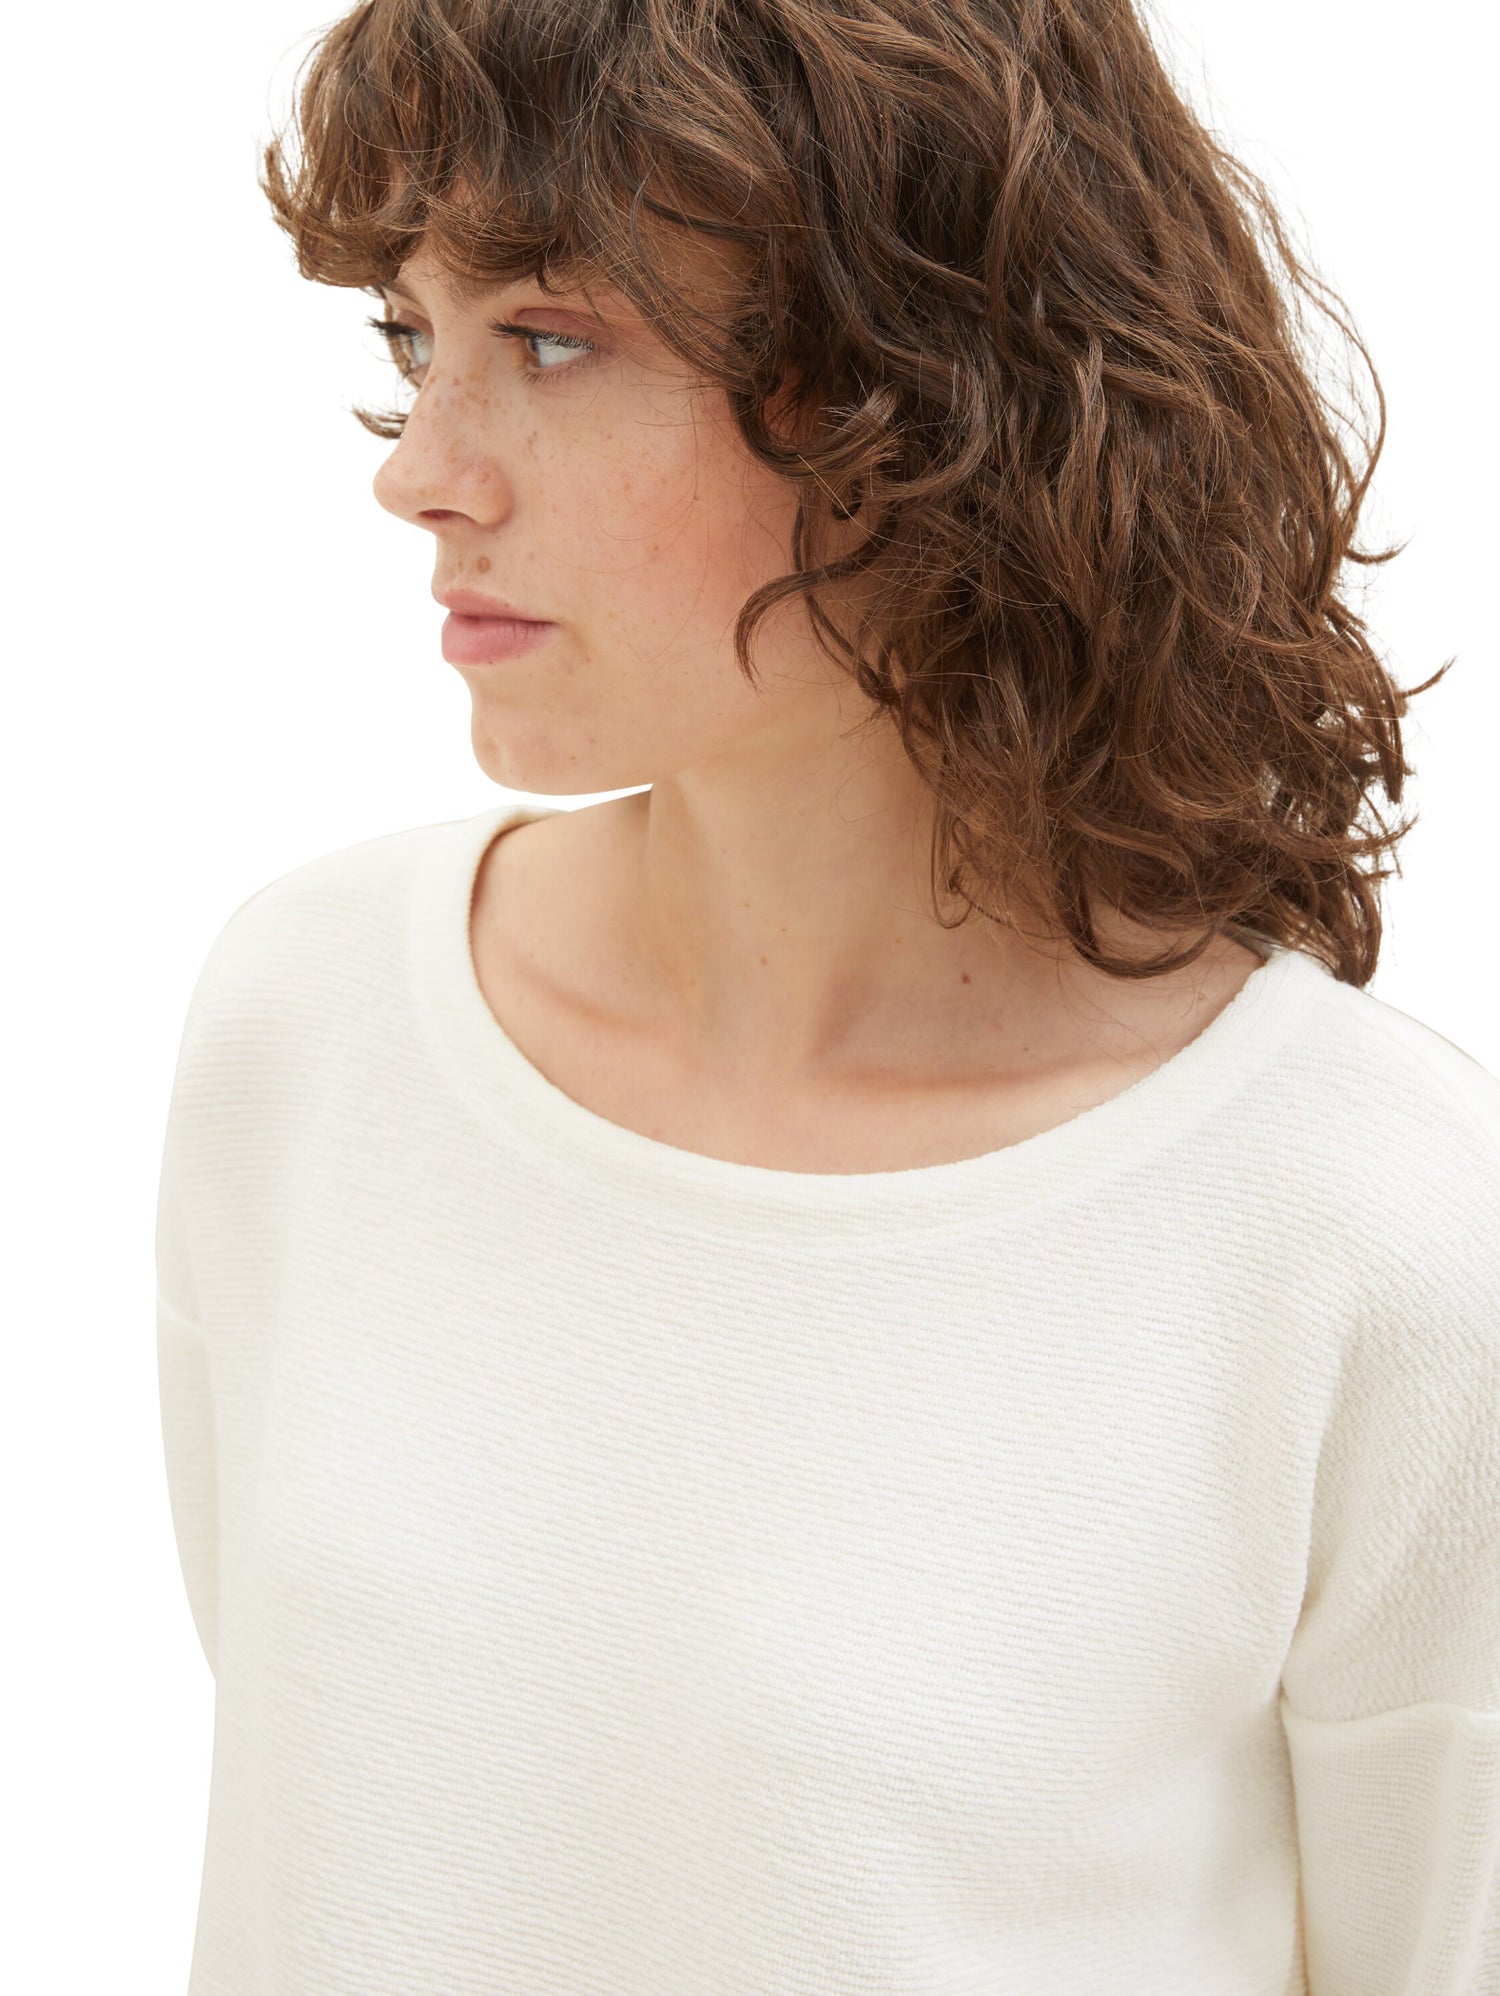 Long Sleeve T Shirt With Wide Round Neckline_1038177_10315_03